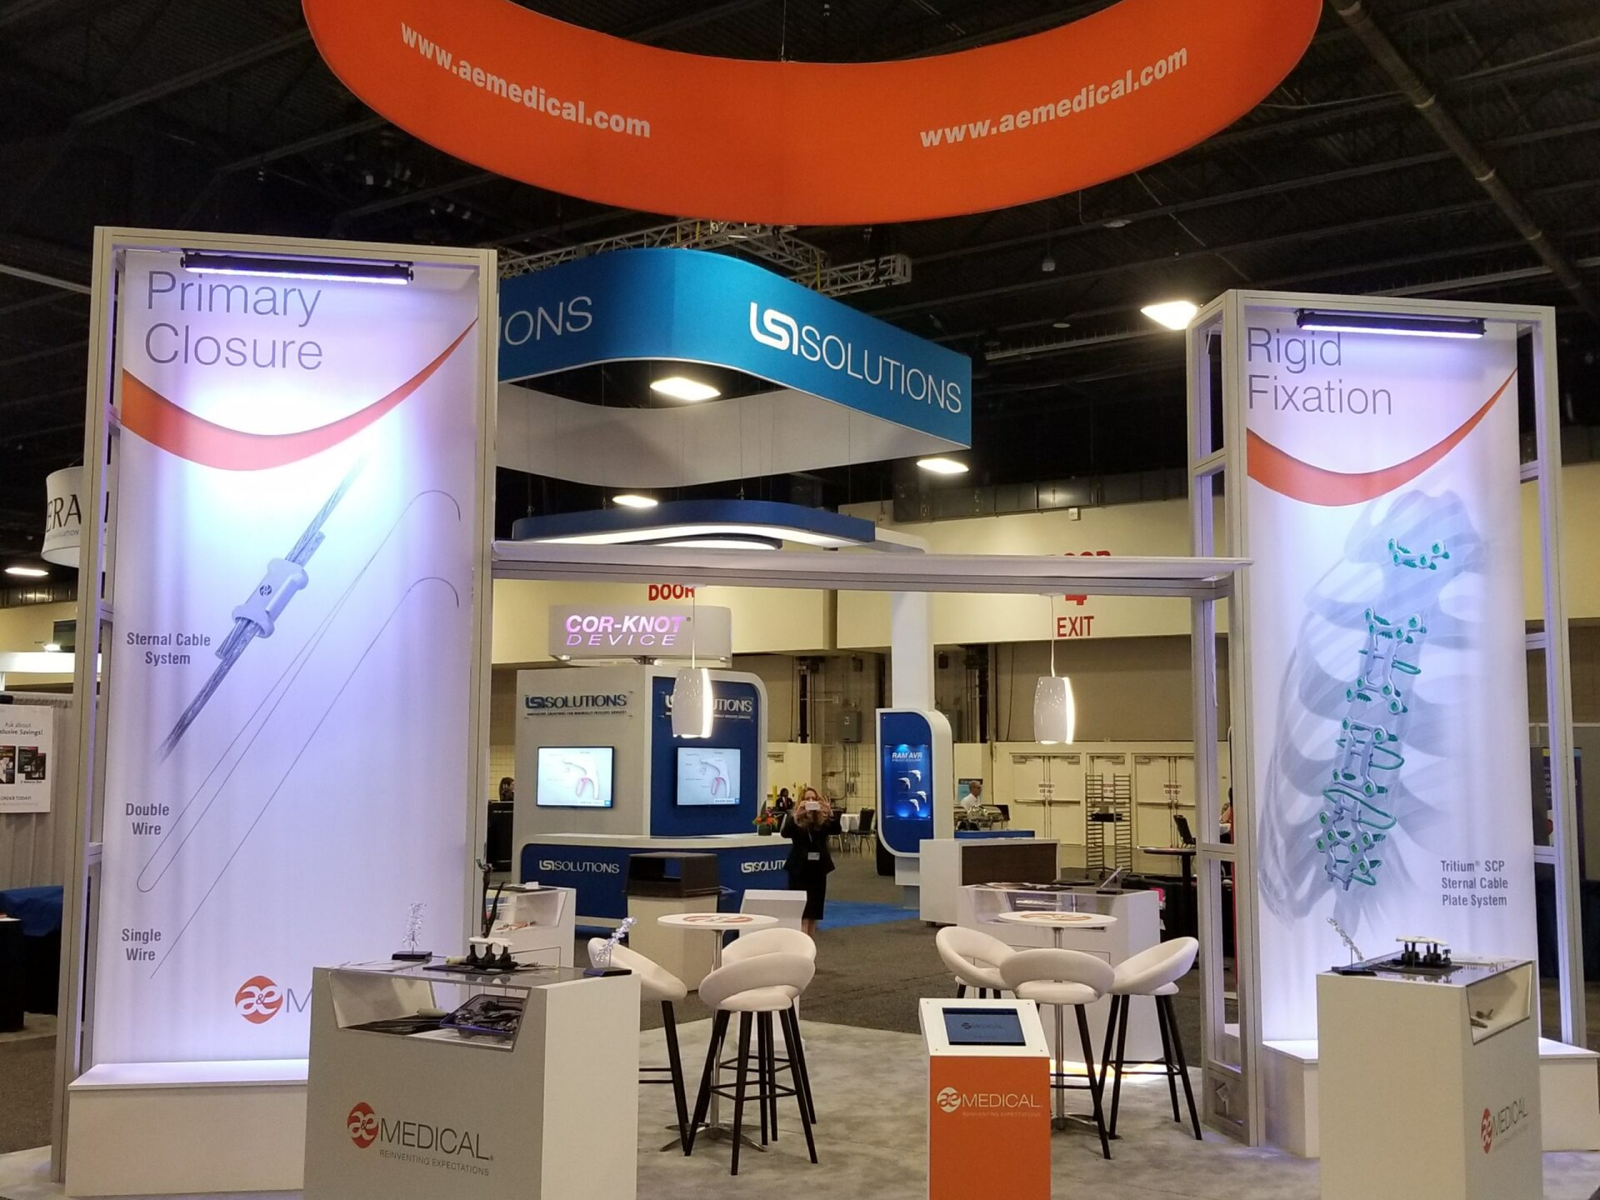 A&E Medical trade show booth at ready for show open. Large 20ft hanging ring with white on the outside and orange on the inside. 16ft metal towers with fabric graphics suspended on the interior.